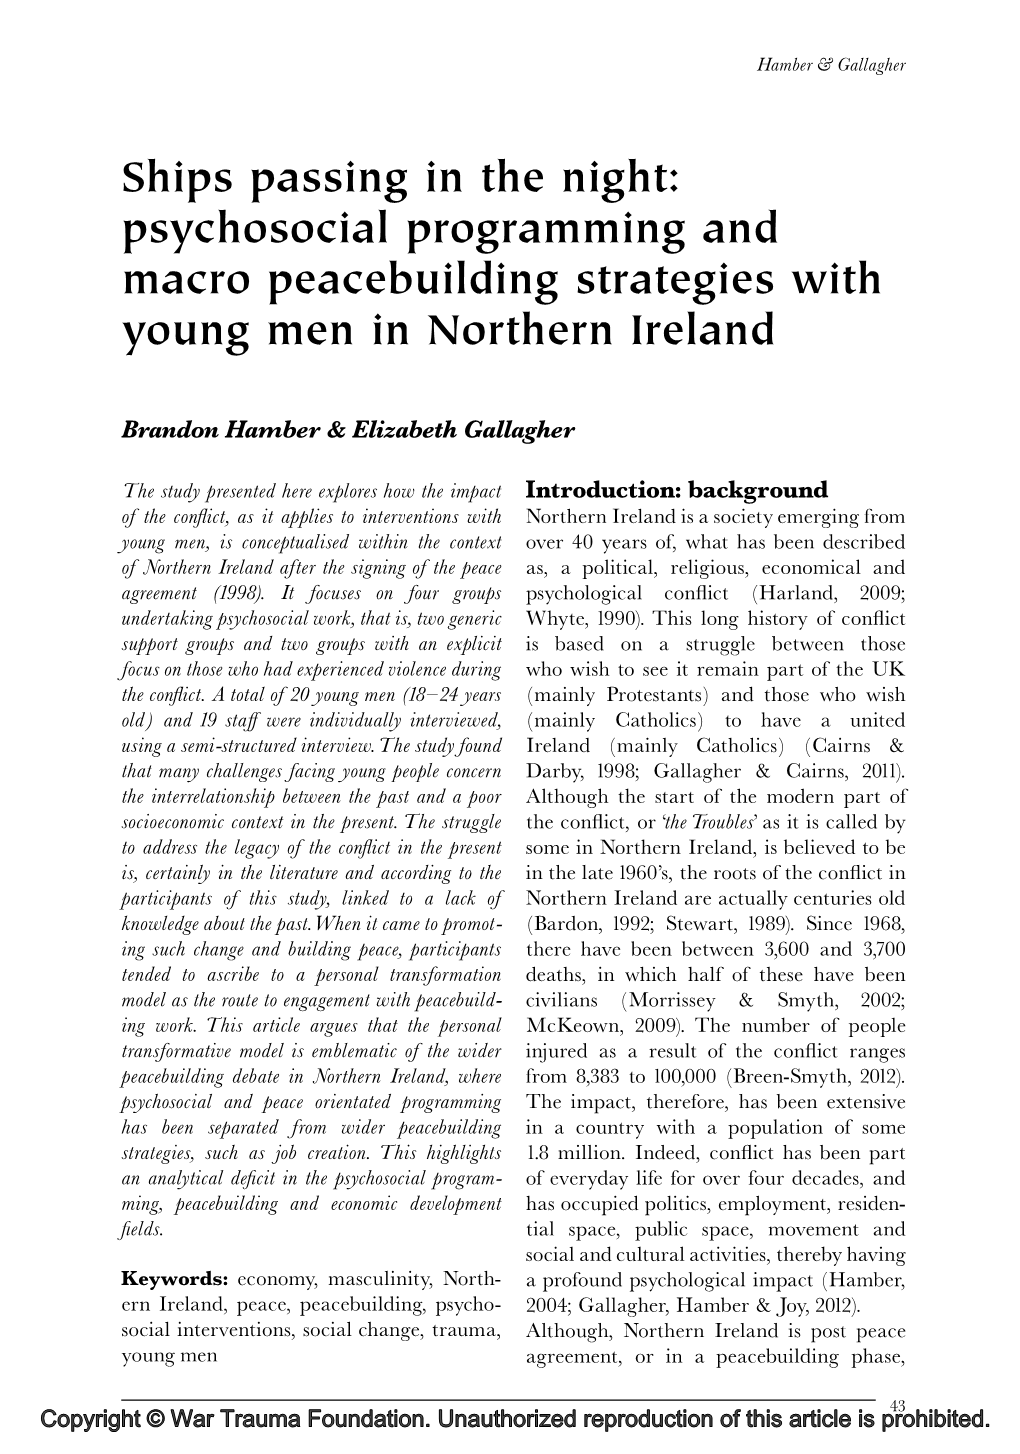 Ships Passing in the Night: Psychosocial Programming and Macro Peacebuilding Strategies with Young Men in Northern Ireland